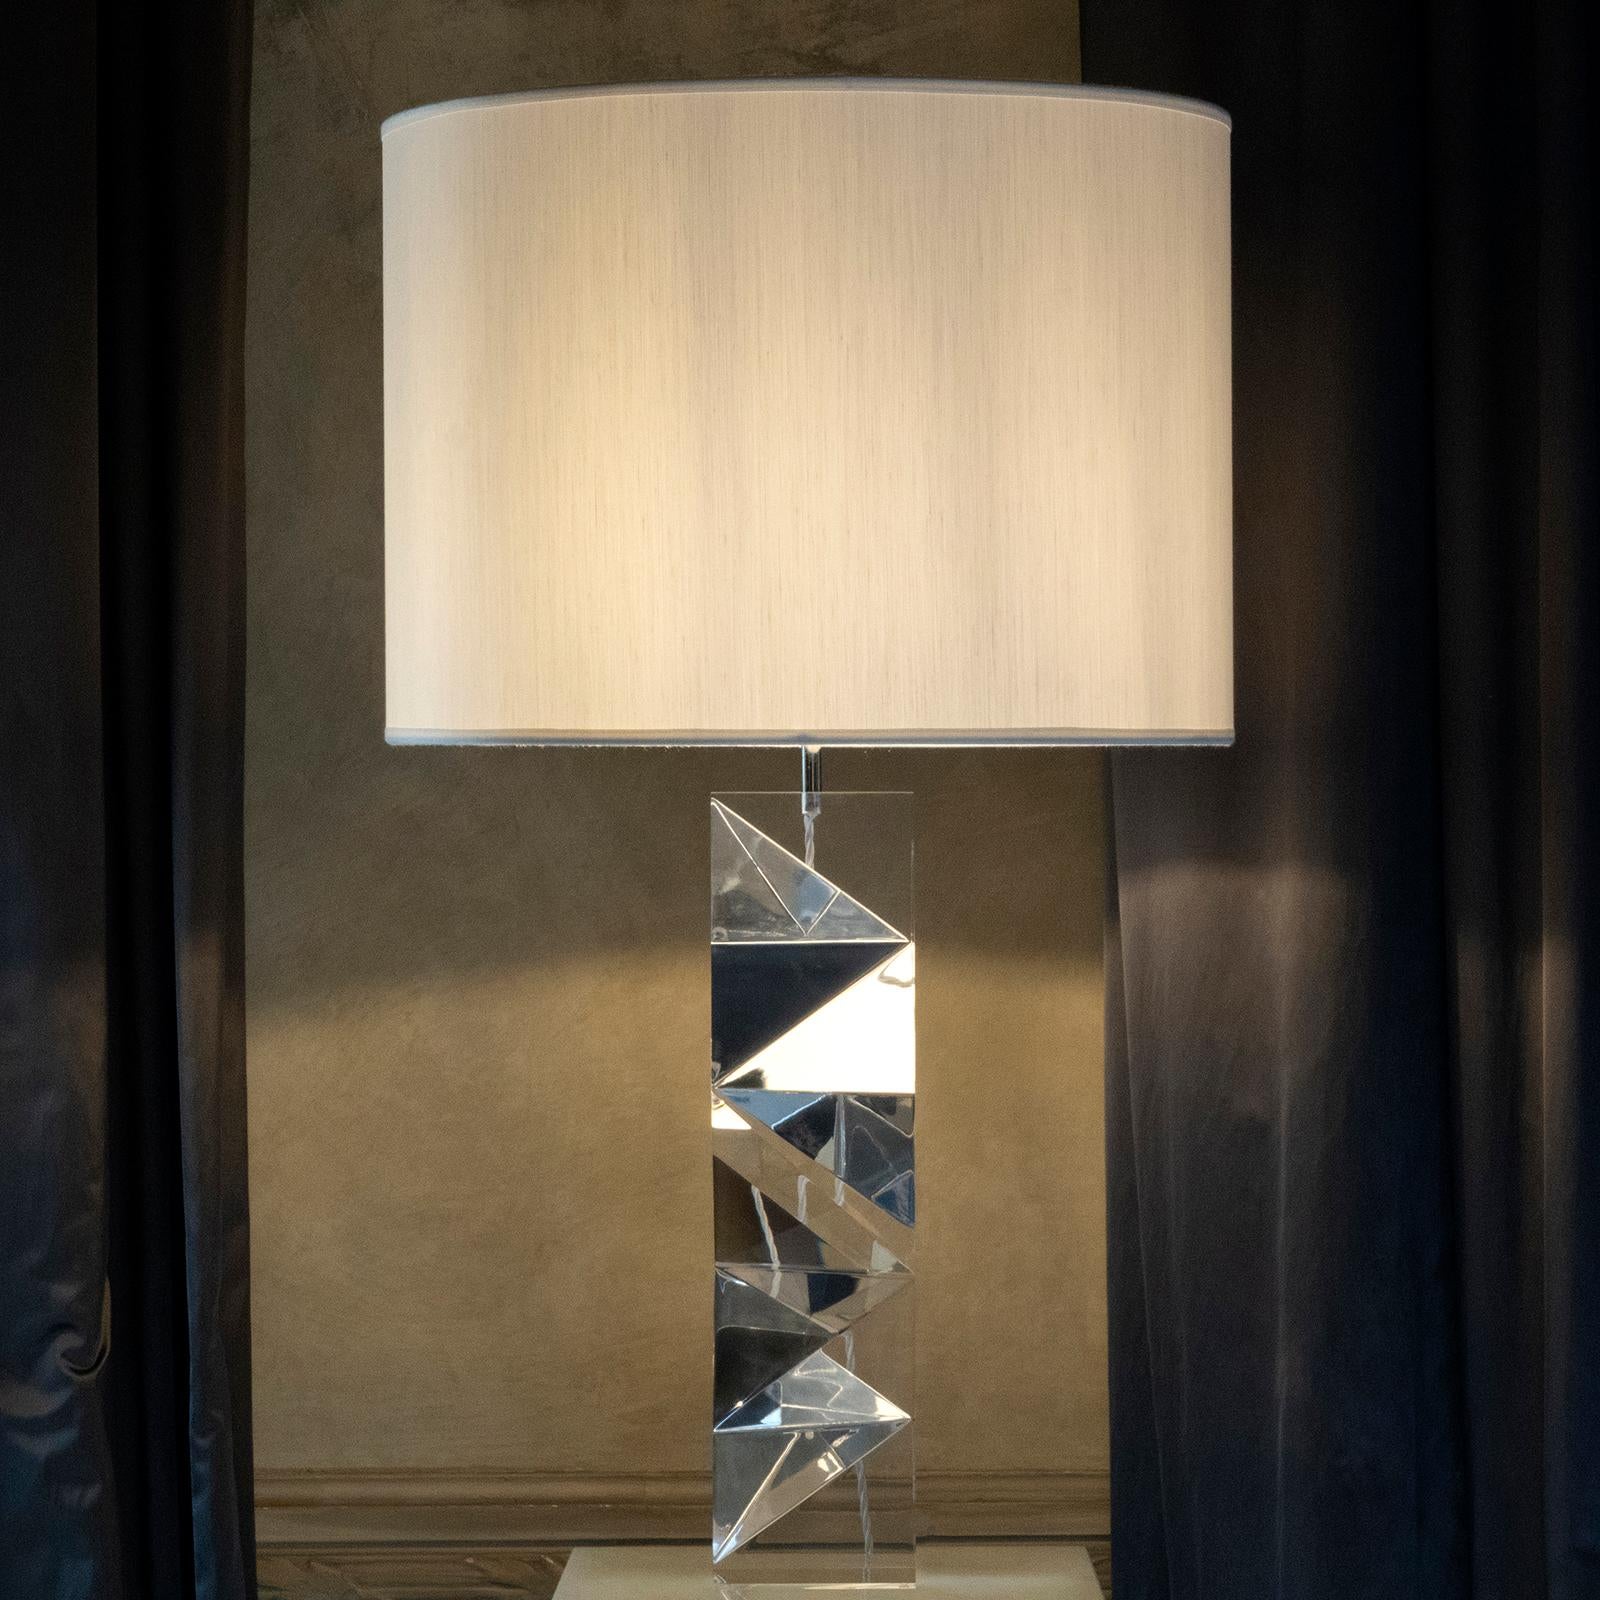 Sculptural faceted clear plexiglass table lamp part of the Flair edition collection, chrome details, clear shantung lampshade, lamp measure cm13 x 13 x H. 60, shade cm 50 x H. 40, total high cm 96.